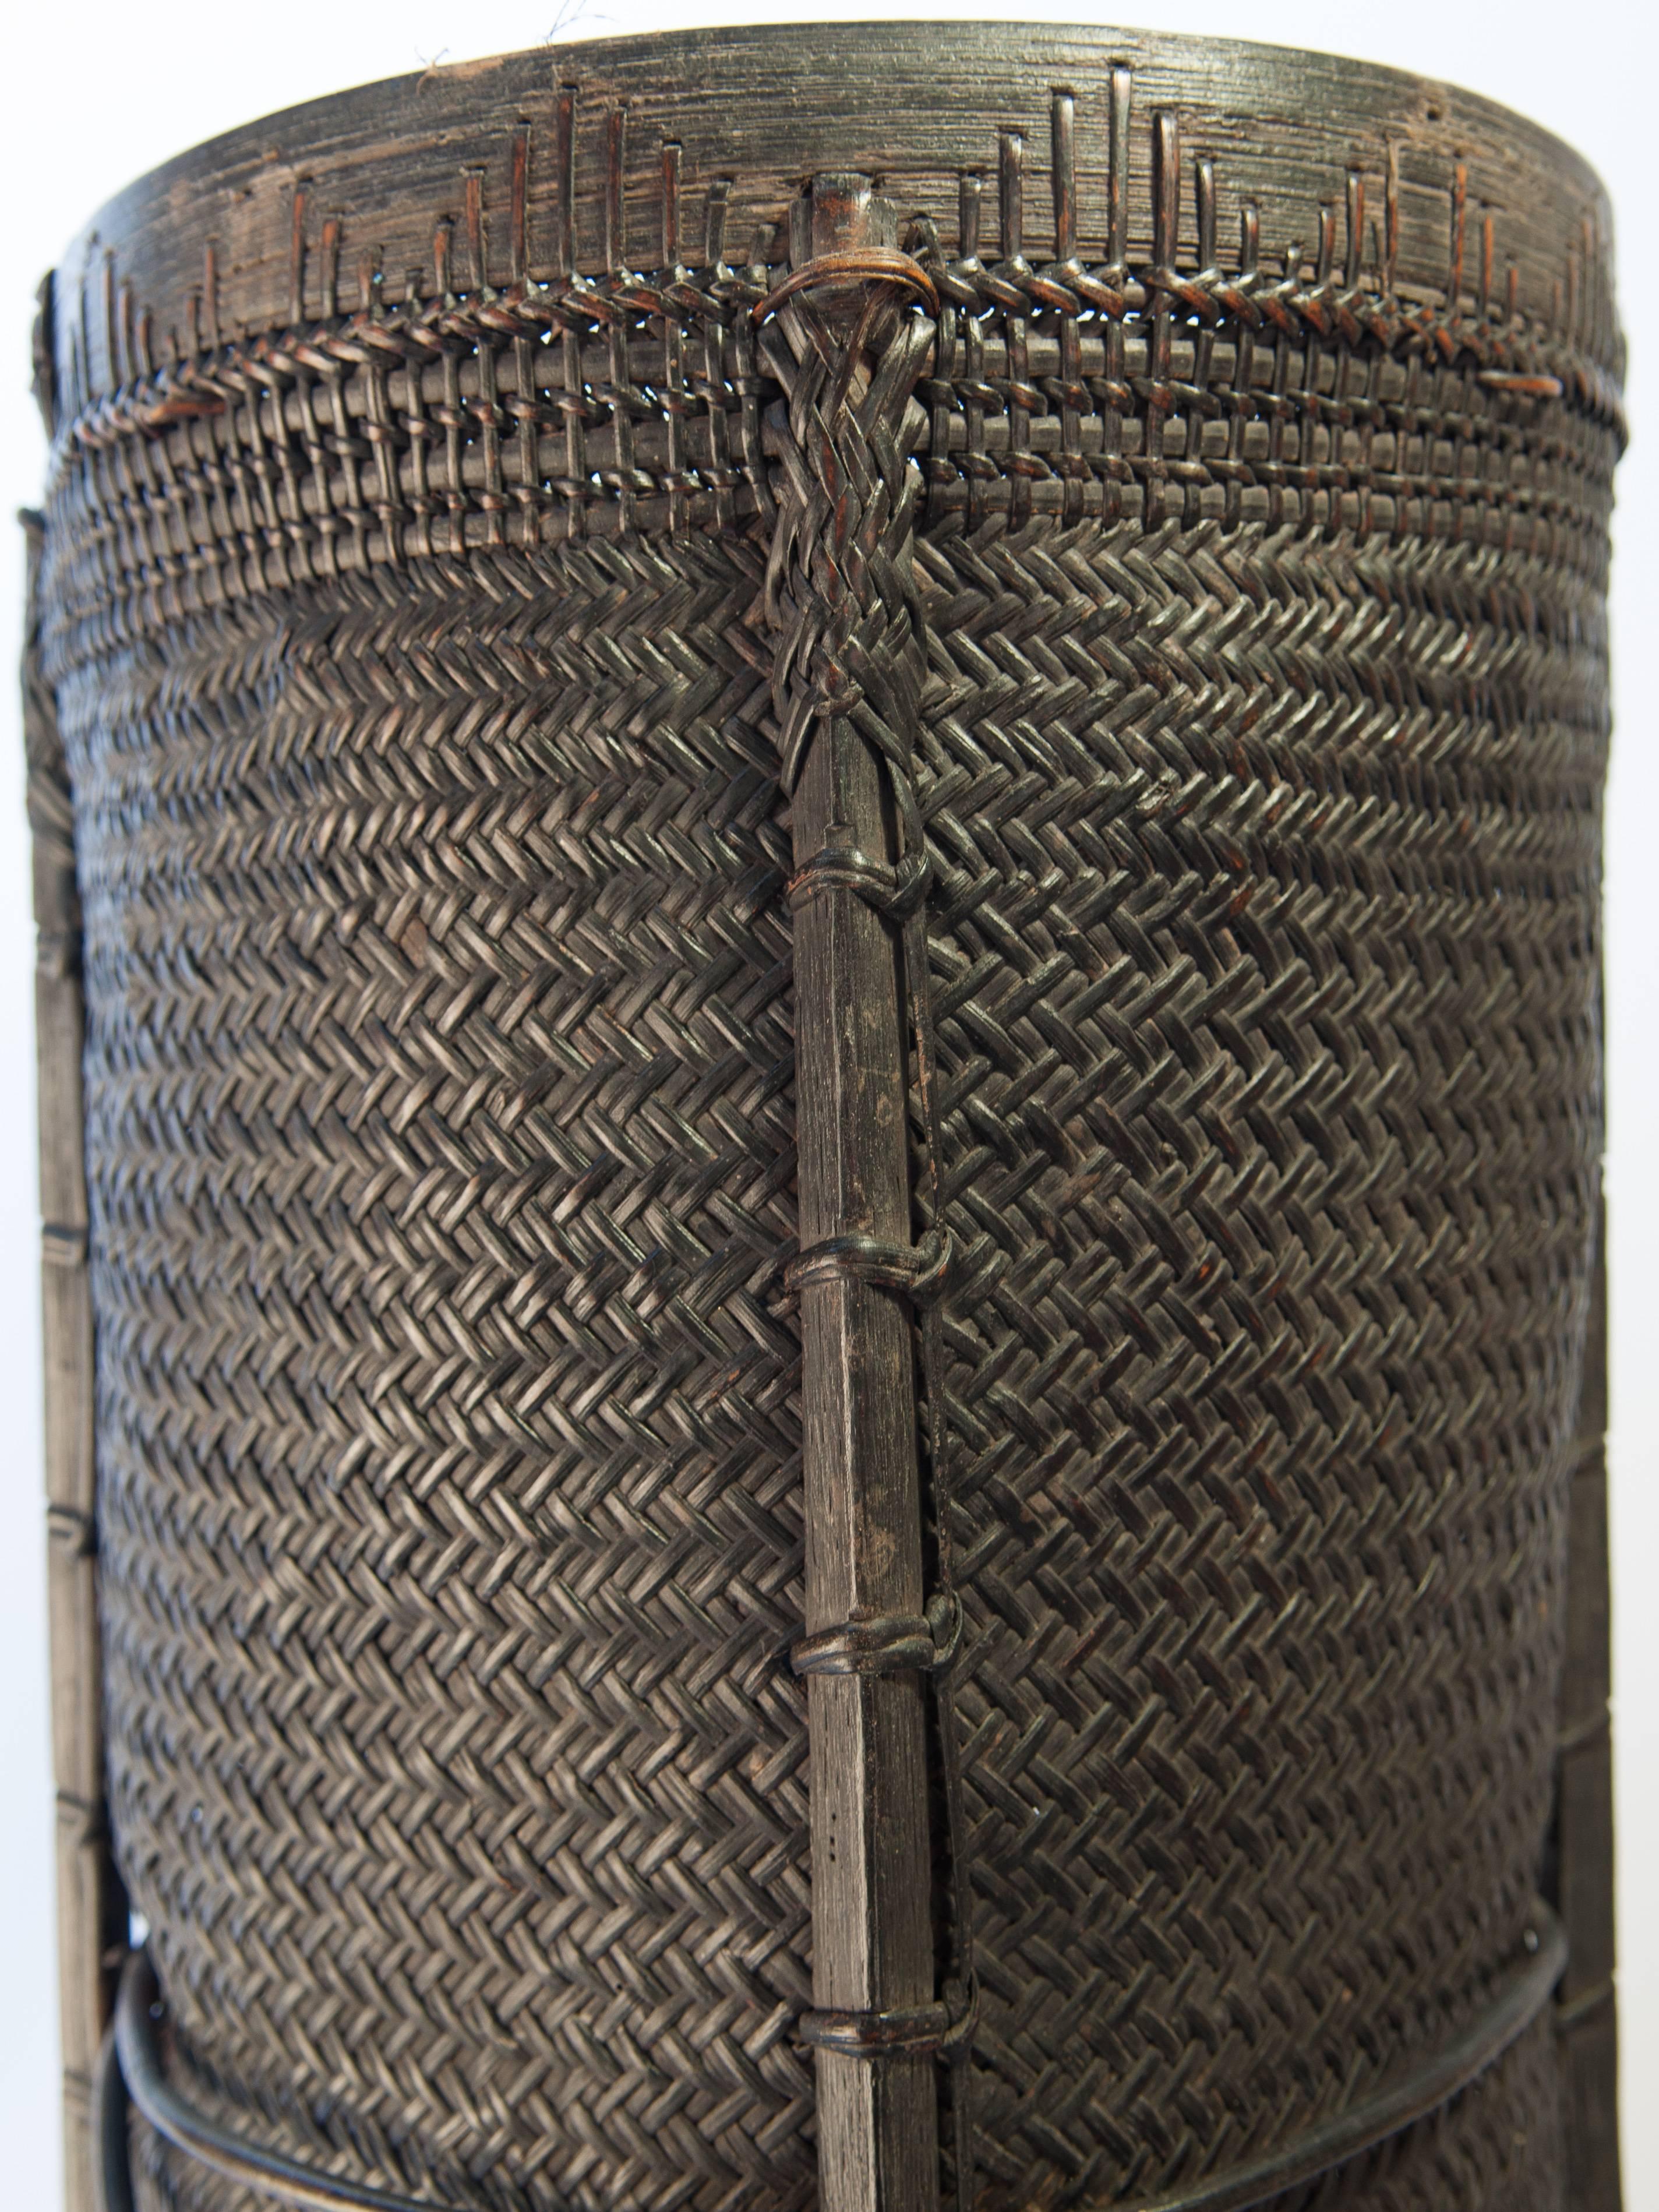 Tall tribal grain storage basket from Borneo, mid-late 20th century.
Offered by Bruce Hughes.
Rattan and bamboo basket from west Borneo. Hand fashioned from rattan and bamboo.
Condition: There is minor damage to the rattan in a couple of small